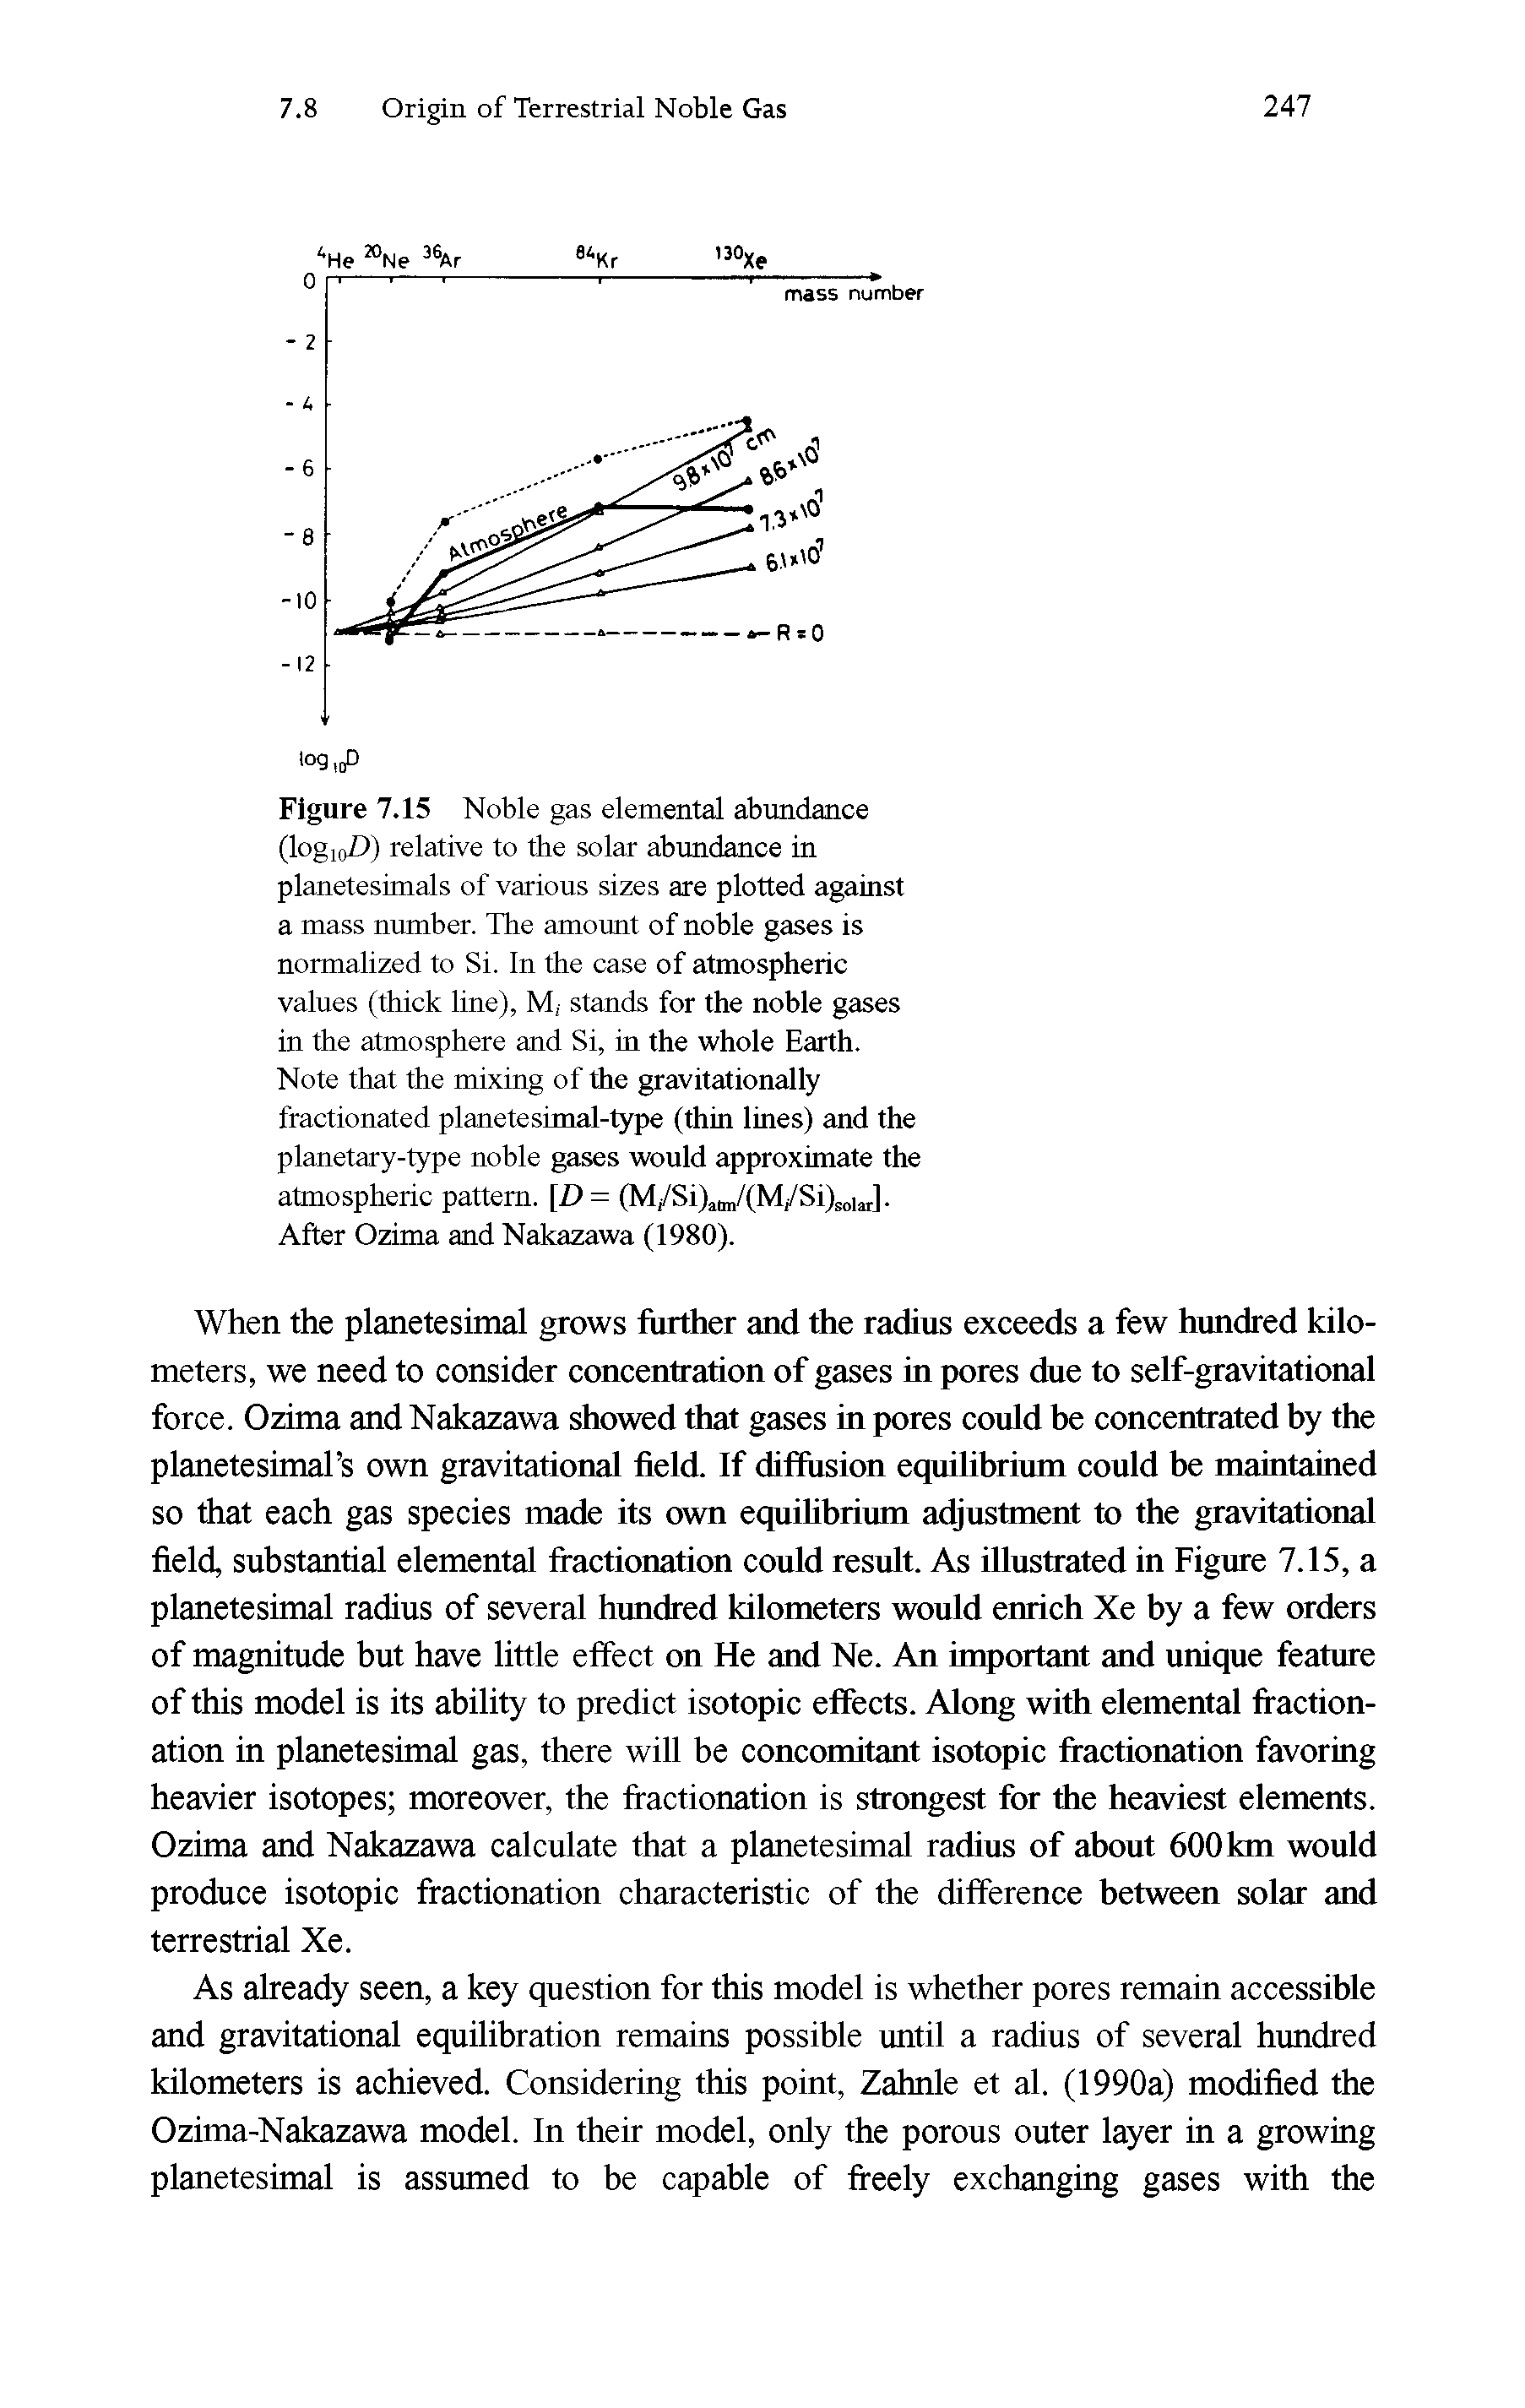 Figure 7.15 Noble gas elemental abundance (log10 >) relative to the solar abundance in planetesimals of various sizes are plotted against a mass number. The amount of noble gases is normalized to Si. In the case of atmospheric values (thick line), M, stands for the noble gases in the atmosphere and Si, in the whole Earth.